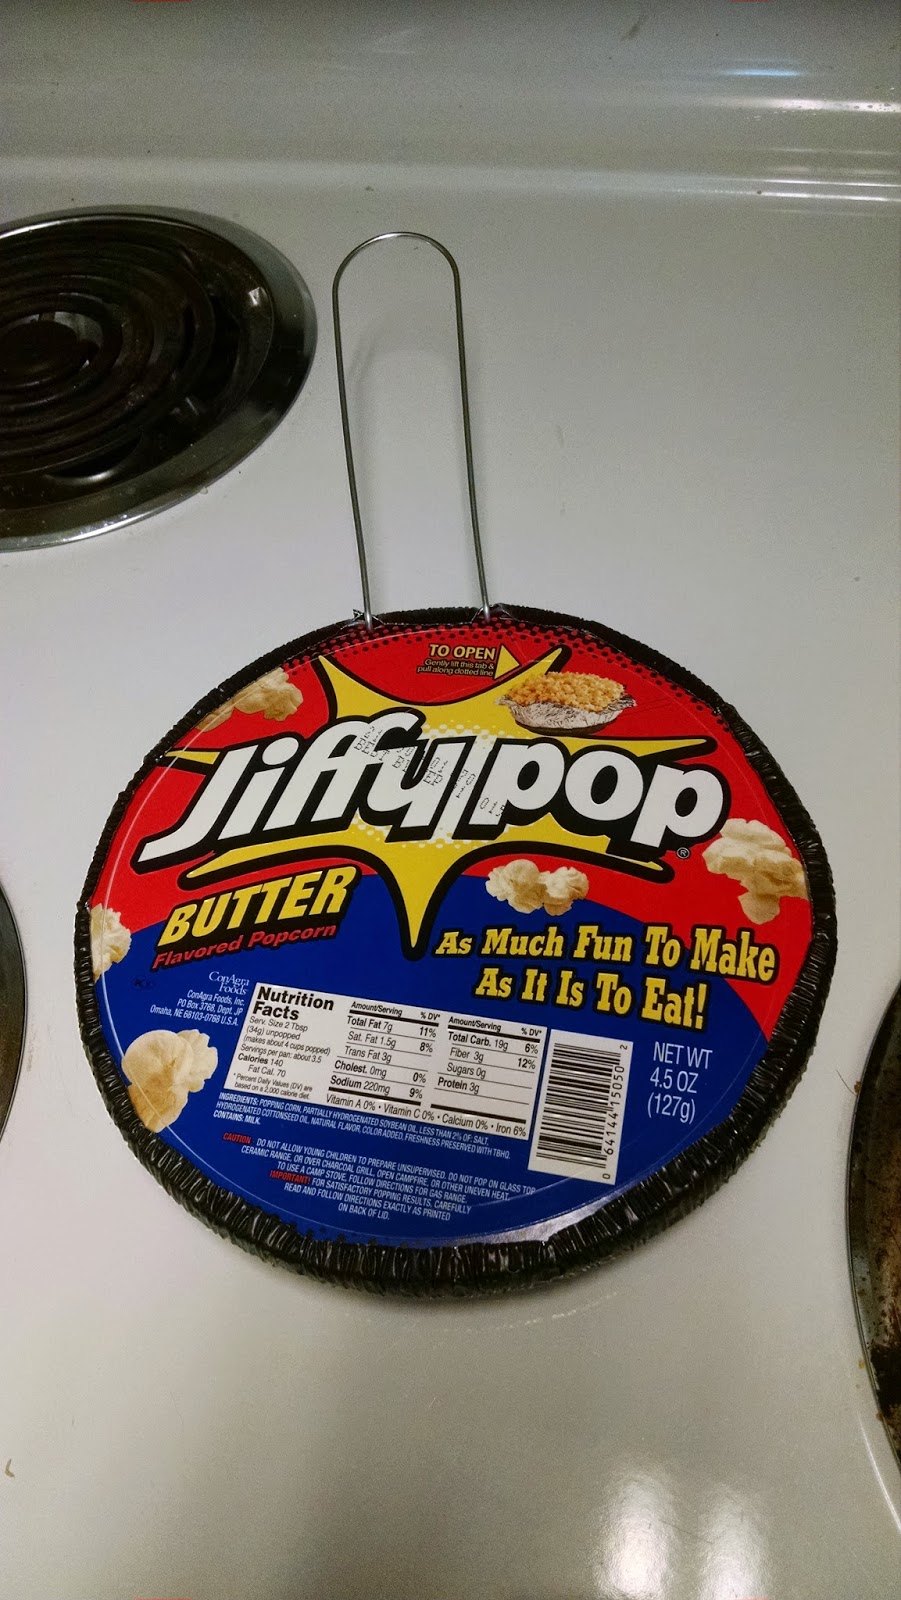 Lissa's Life in the Southwest: Jiffy Pop Food Review